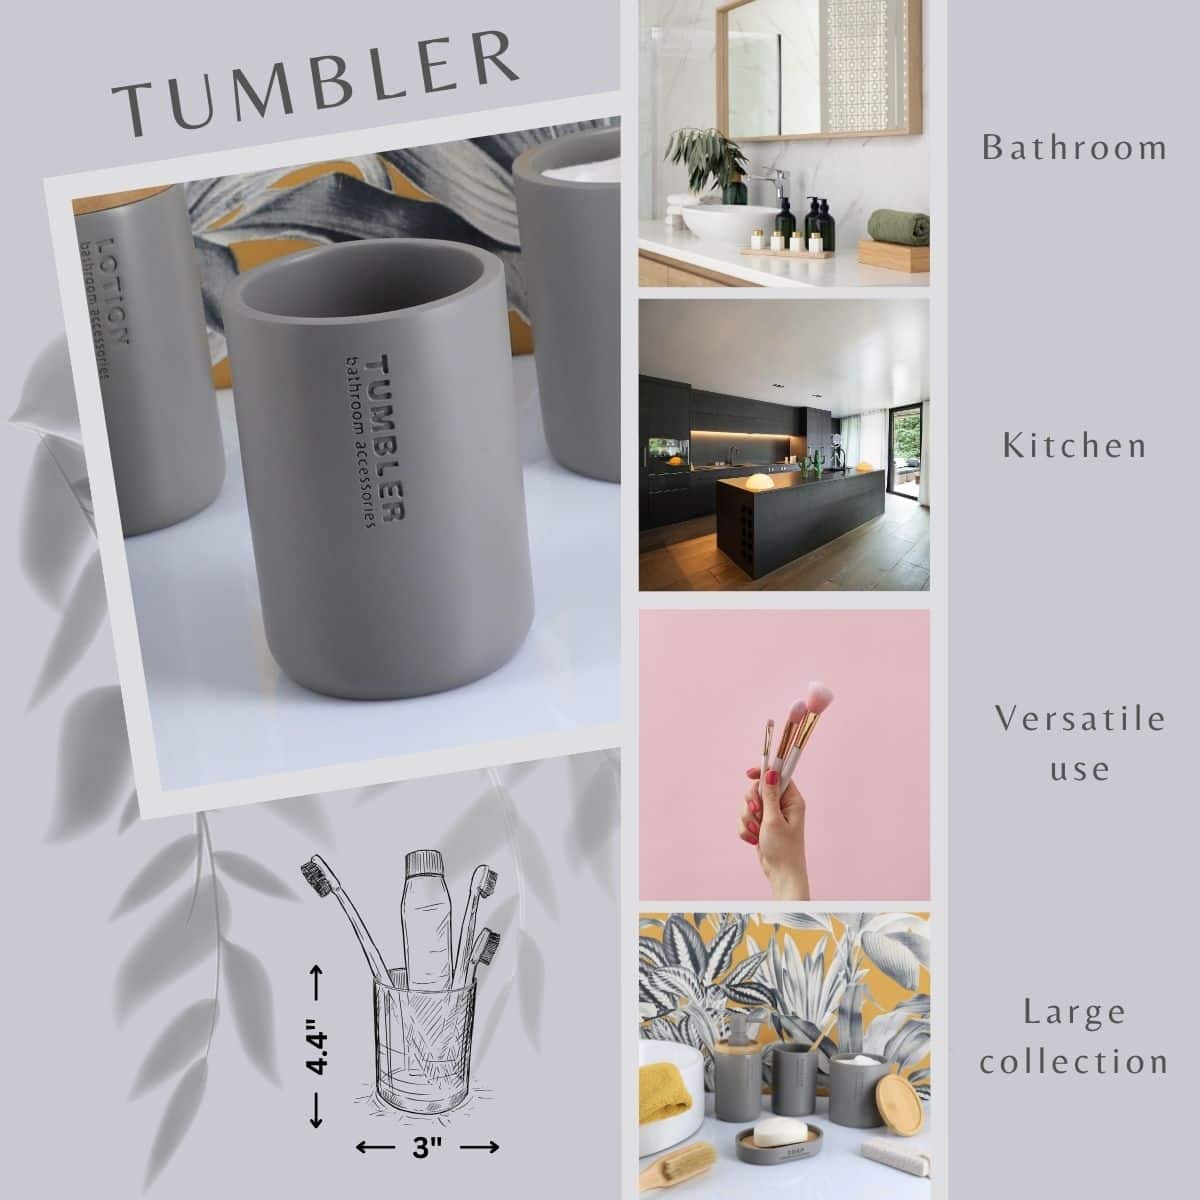 Versatile ash gray tumbler cup for bathroom kitchen toothbrushes make-up brushes combs bathroom essentials